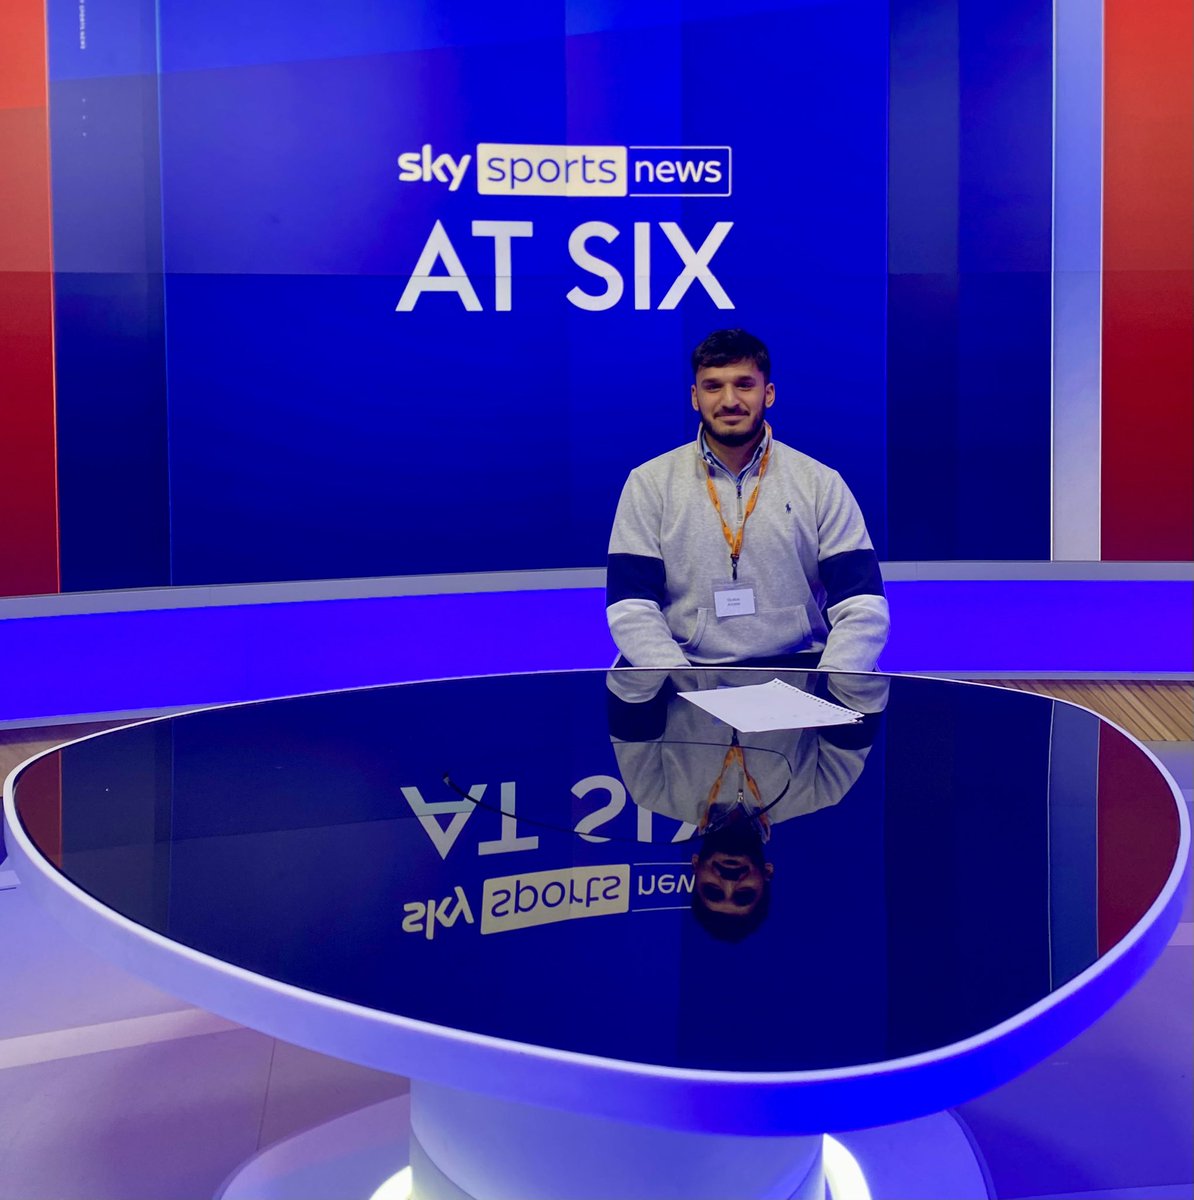 Enormously grateful to have had the opportunity to watch the Sky Sports team in action today. Huge thanks to all for being so generous with their time. A real privilege to have spent time with you. A great team who have further inspired me towards a career in journalism 🙌🏾